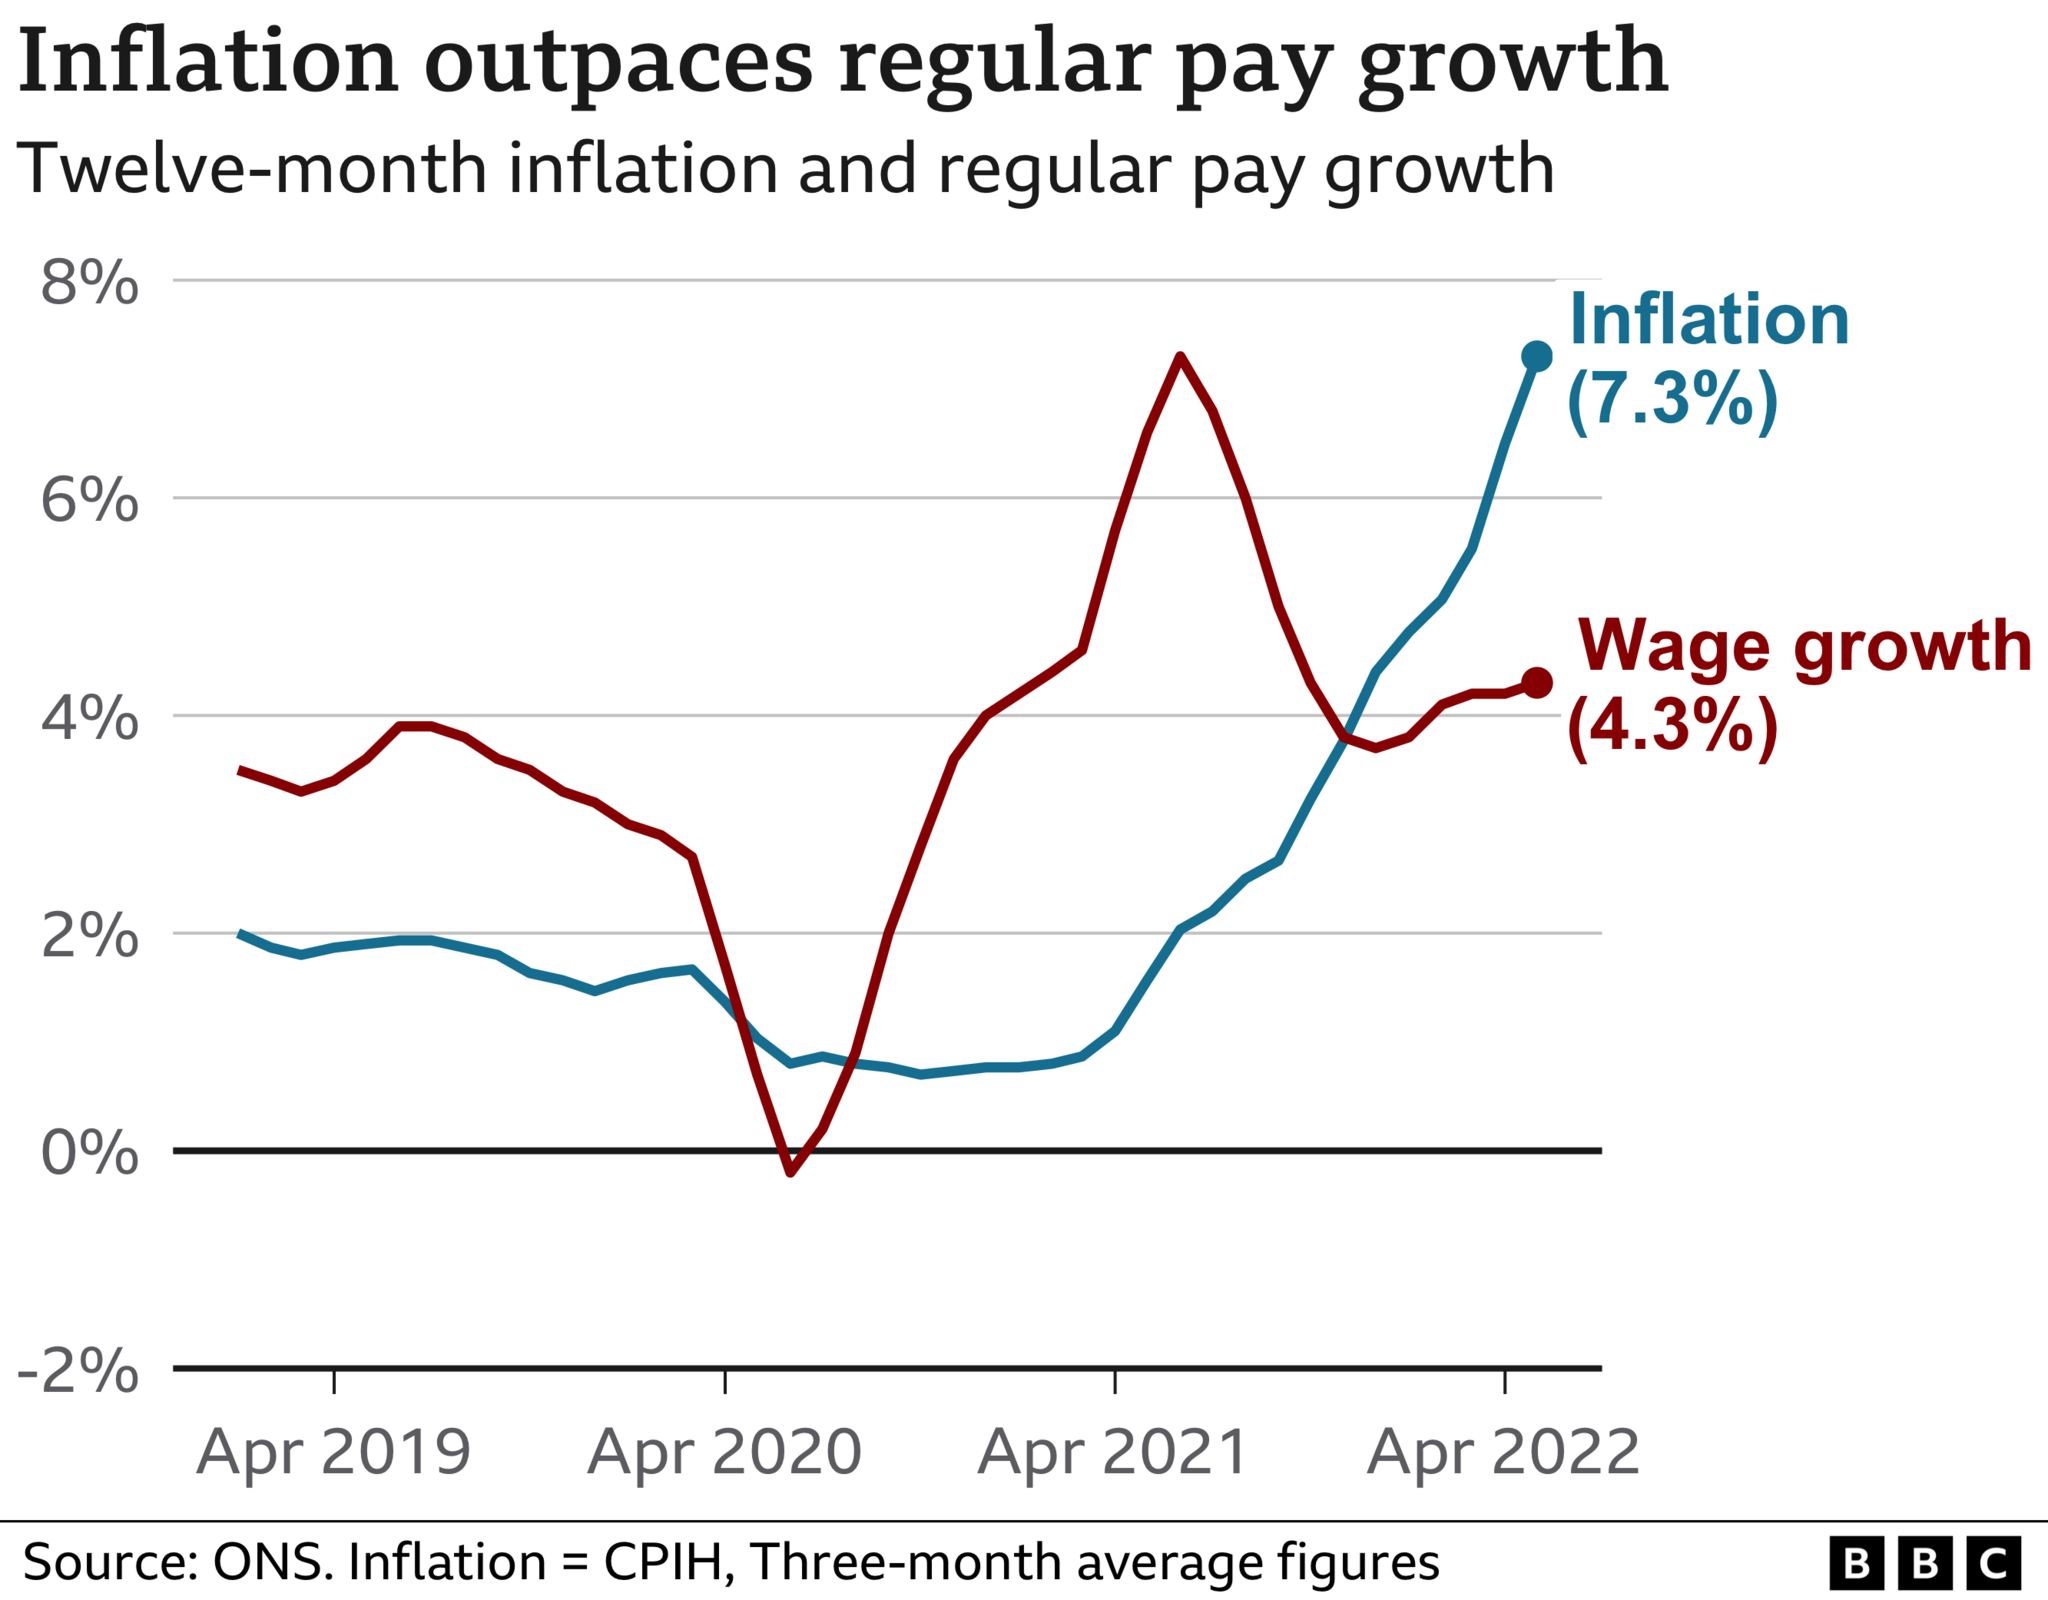 Graph showing 12-month inflation and regular pay growth